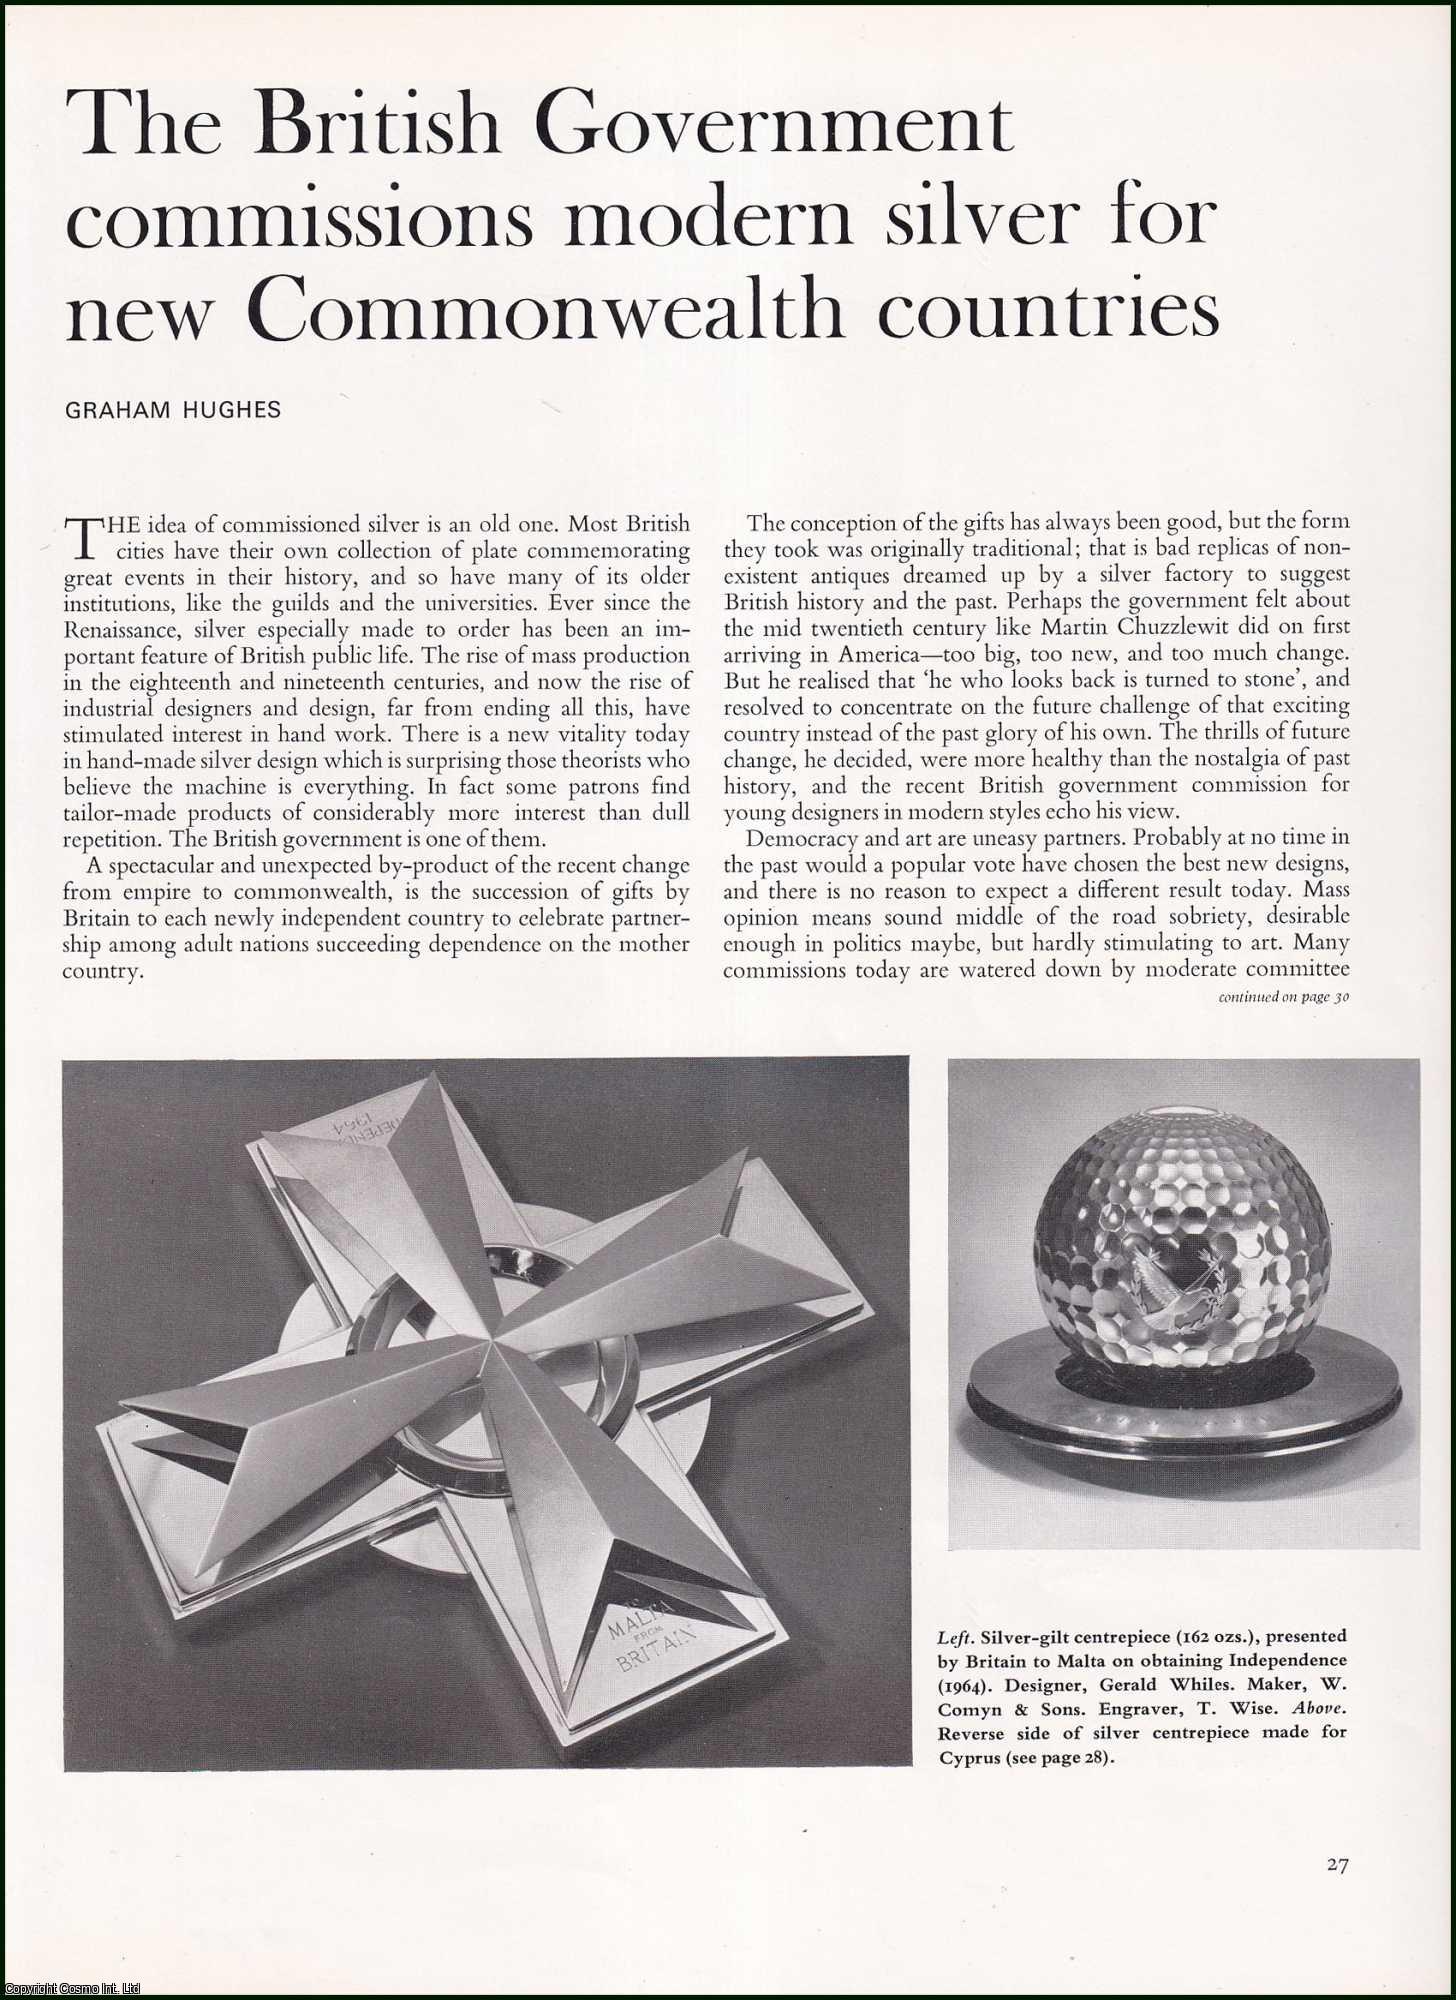 Graham Hughes - The Modern Silver Commissioned by the British Government for the New Commonwealth Countries. An original article from The Connoisseur, 1966.